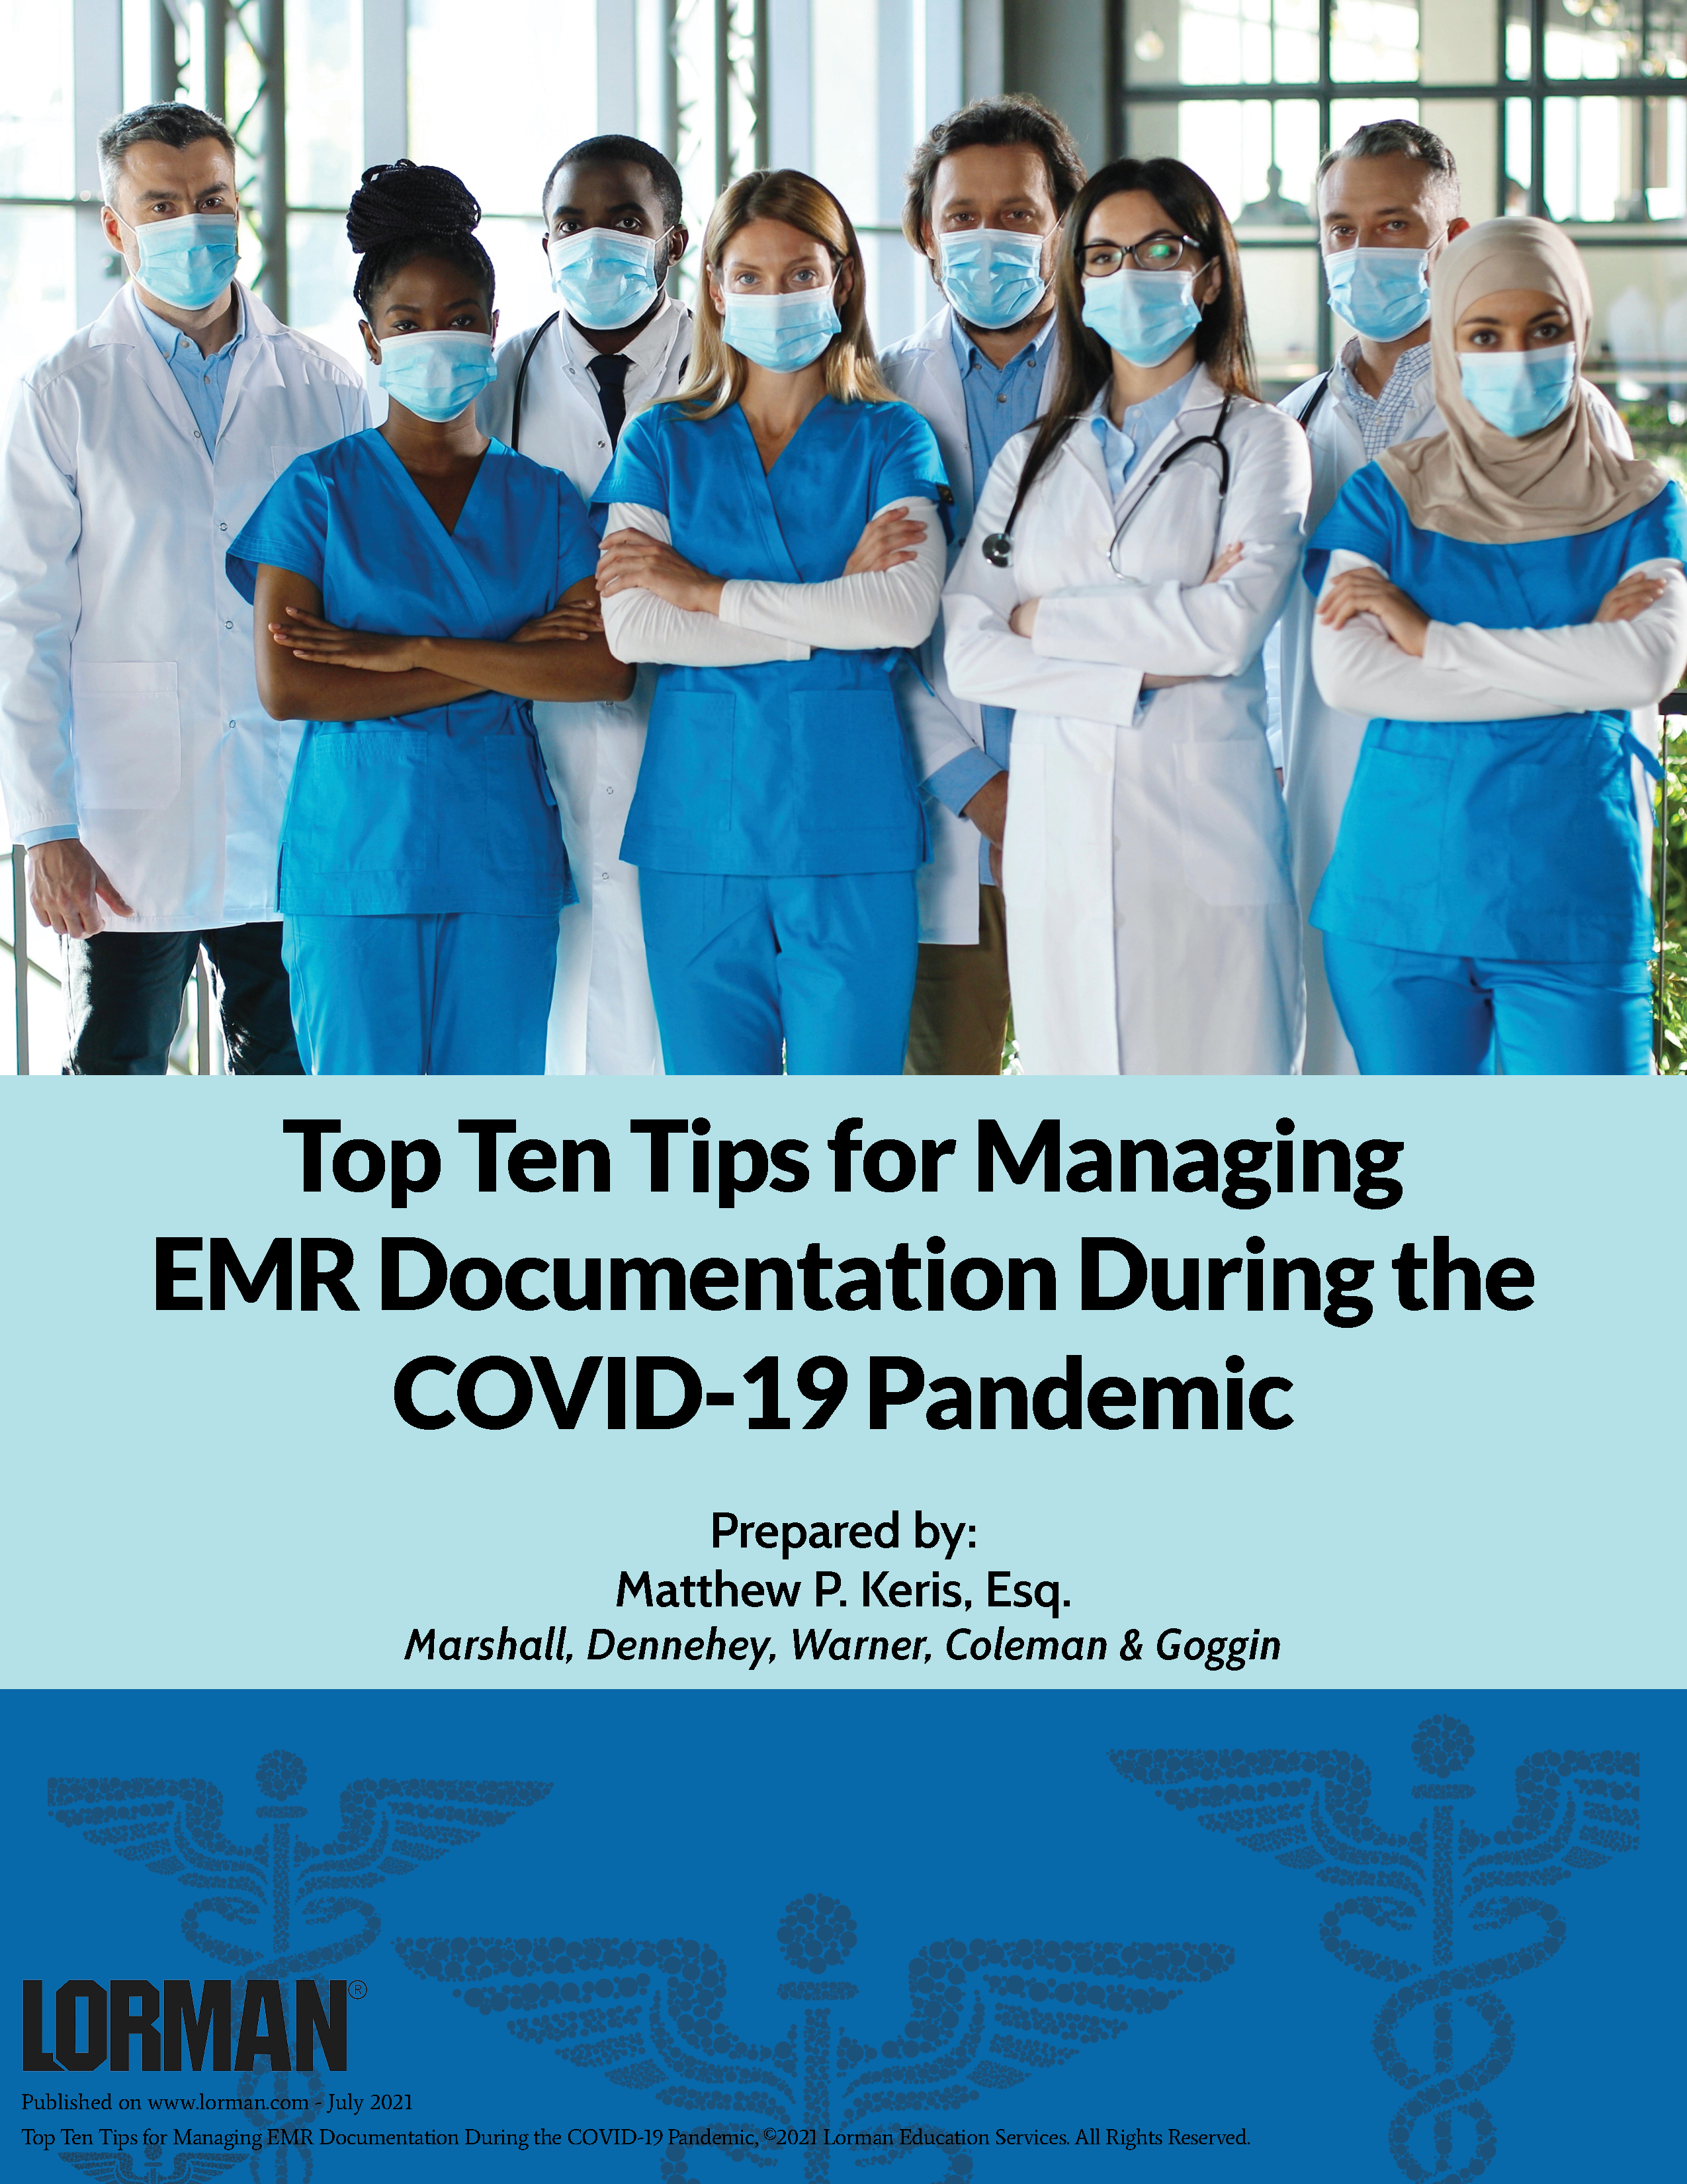 Top Ten Tips for Managing EMR Documentation During the COVID-19 Pandemic